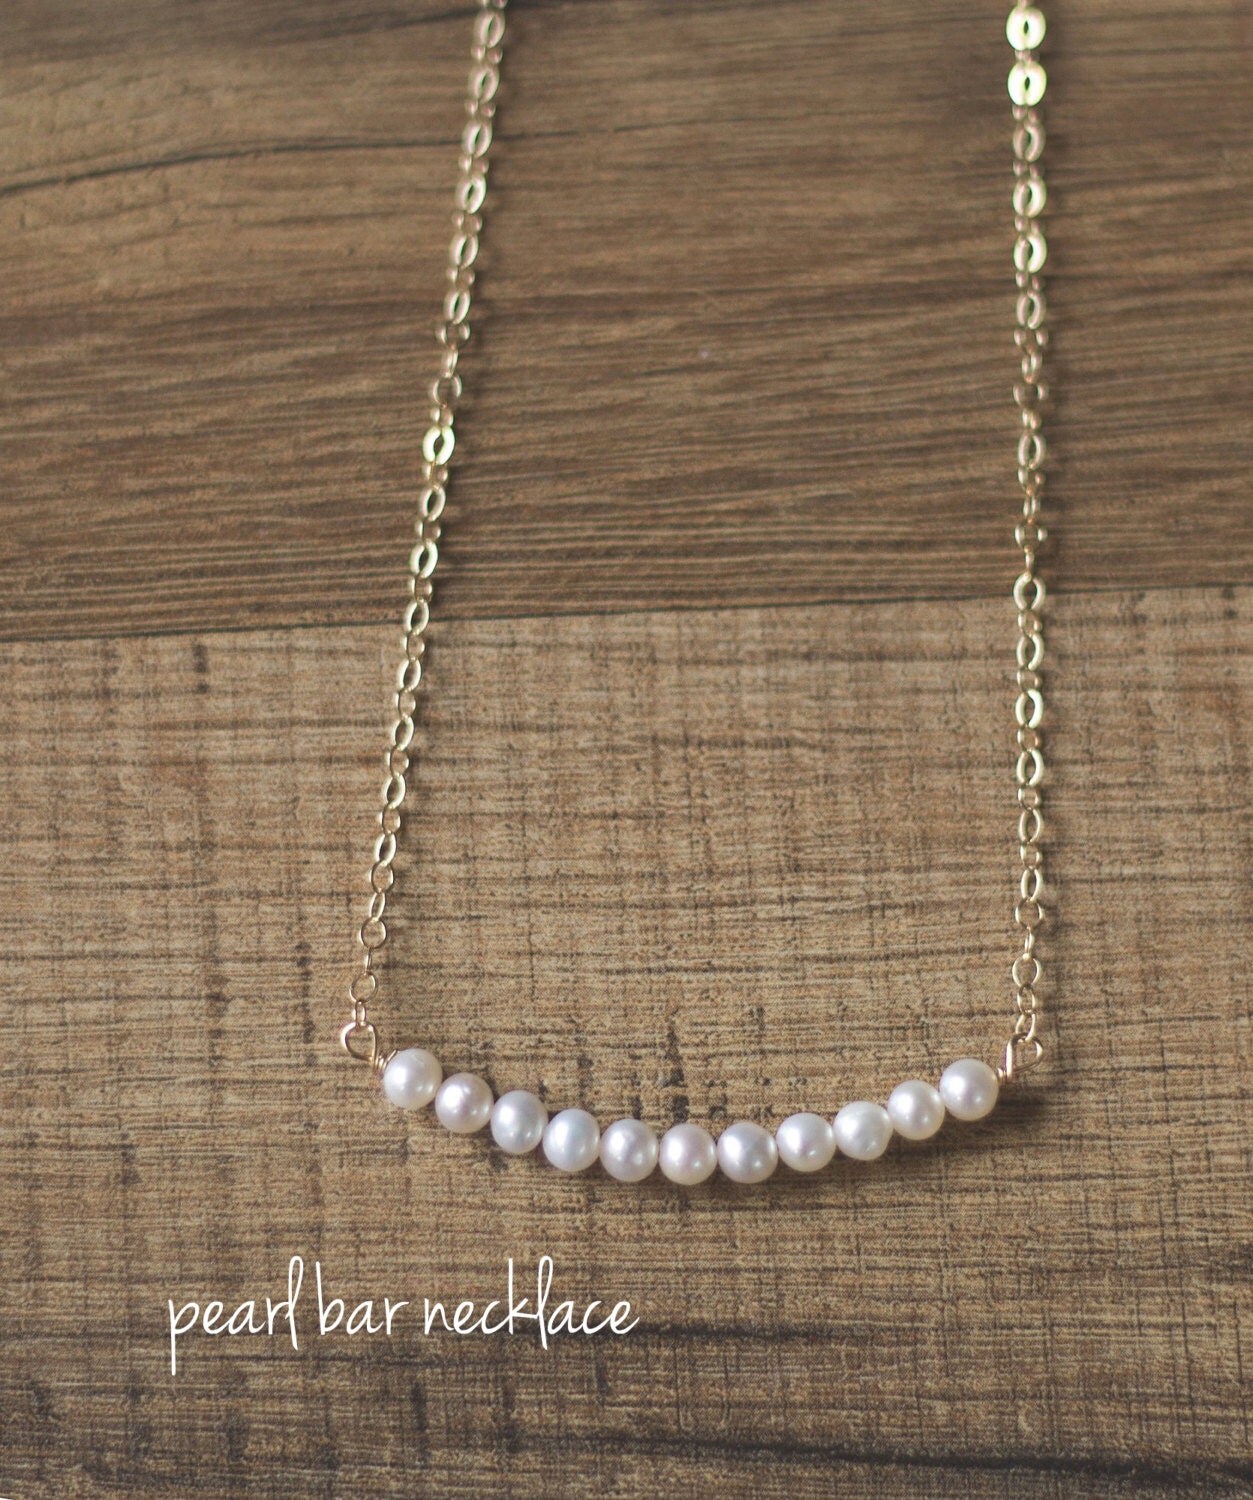 Pearl Necklace, Bridesmaids Necklace, Choker Pearl Necklace, Dainty Pearl Necklace, 14k gold filled, Sterling orvRose Gold Filled Chain